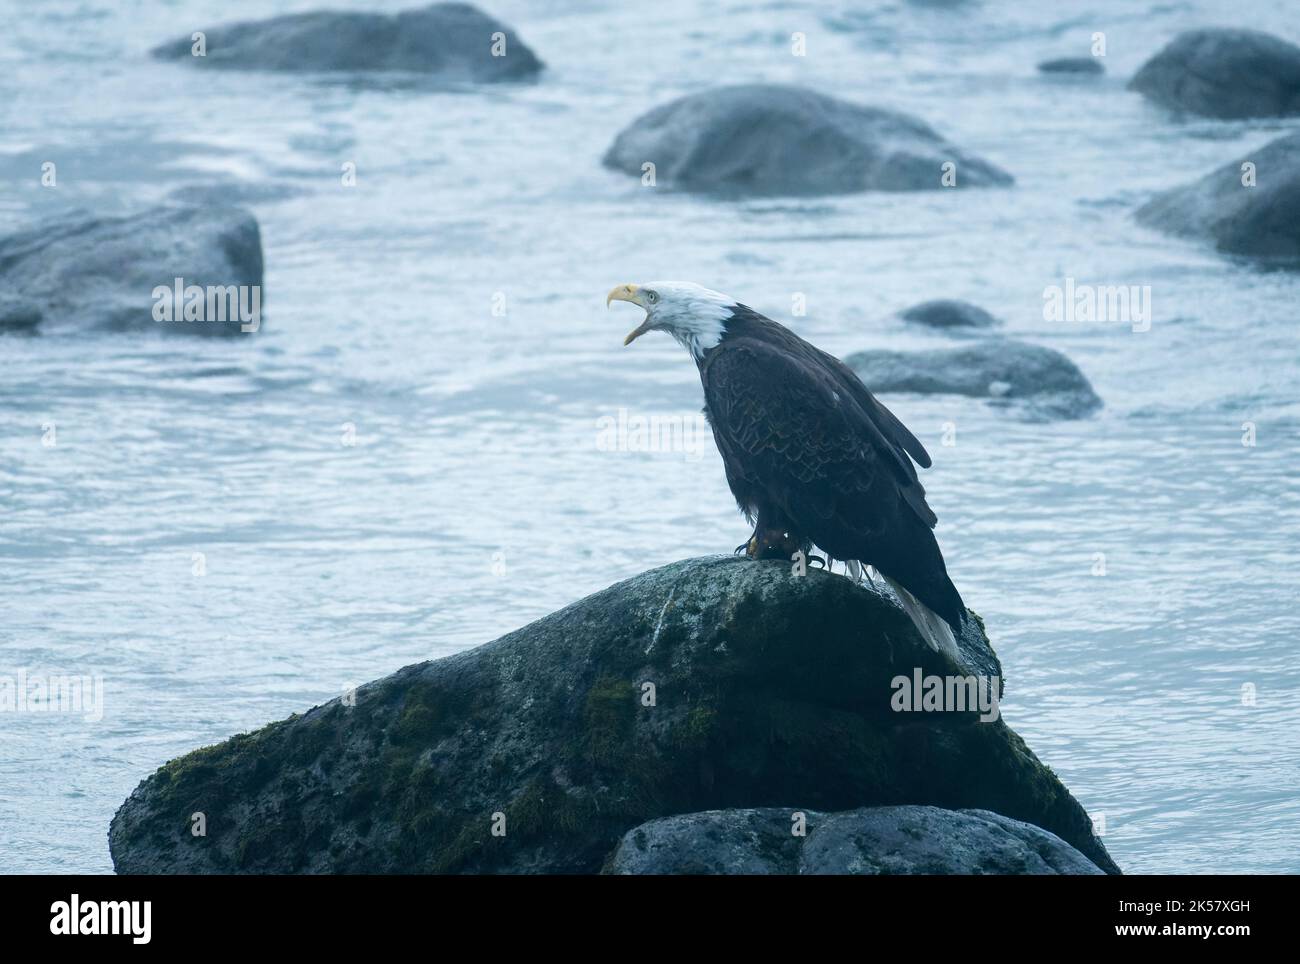 A bald eagle (Haliaeetus leucocephalus) screeches from a rock in the Chilkoot River in Alaska. Stock Photo